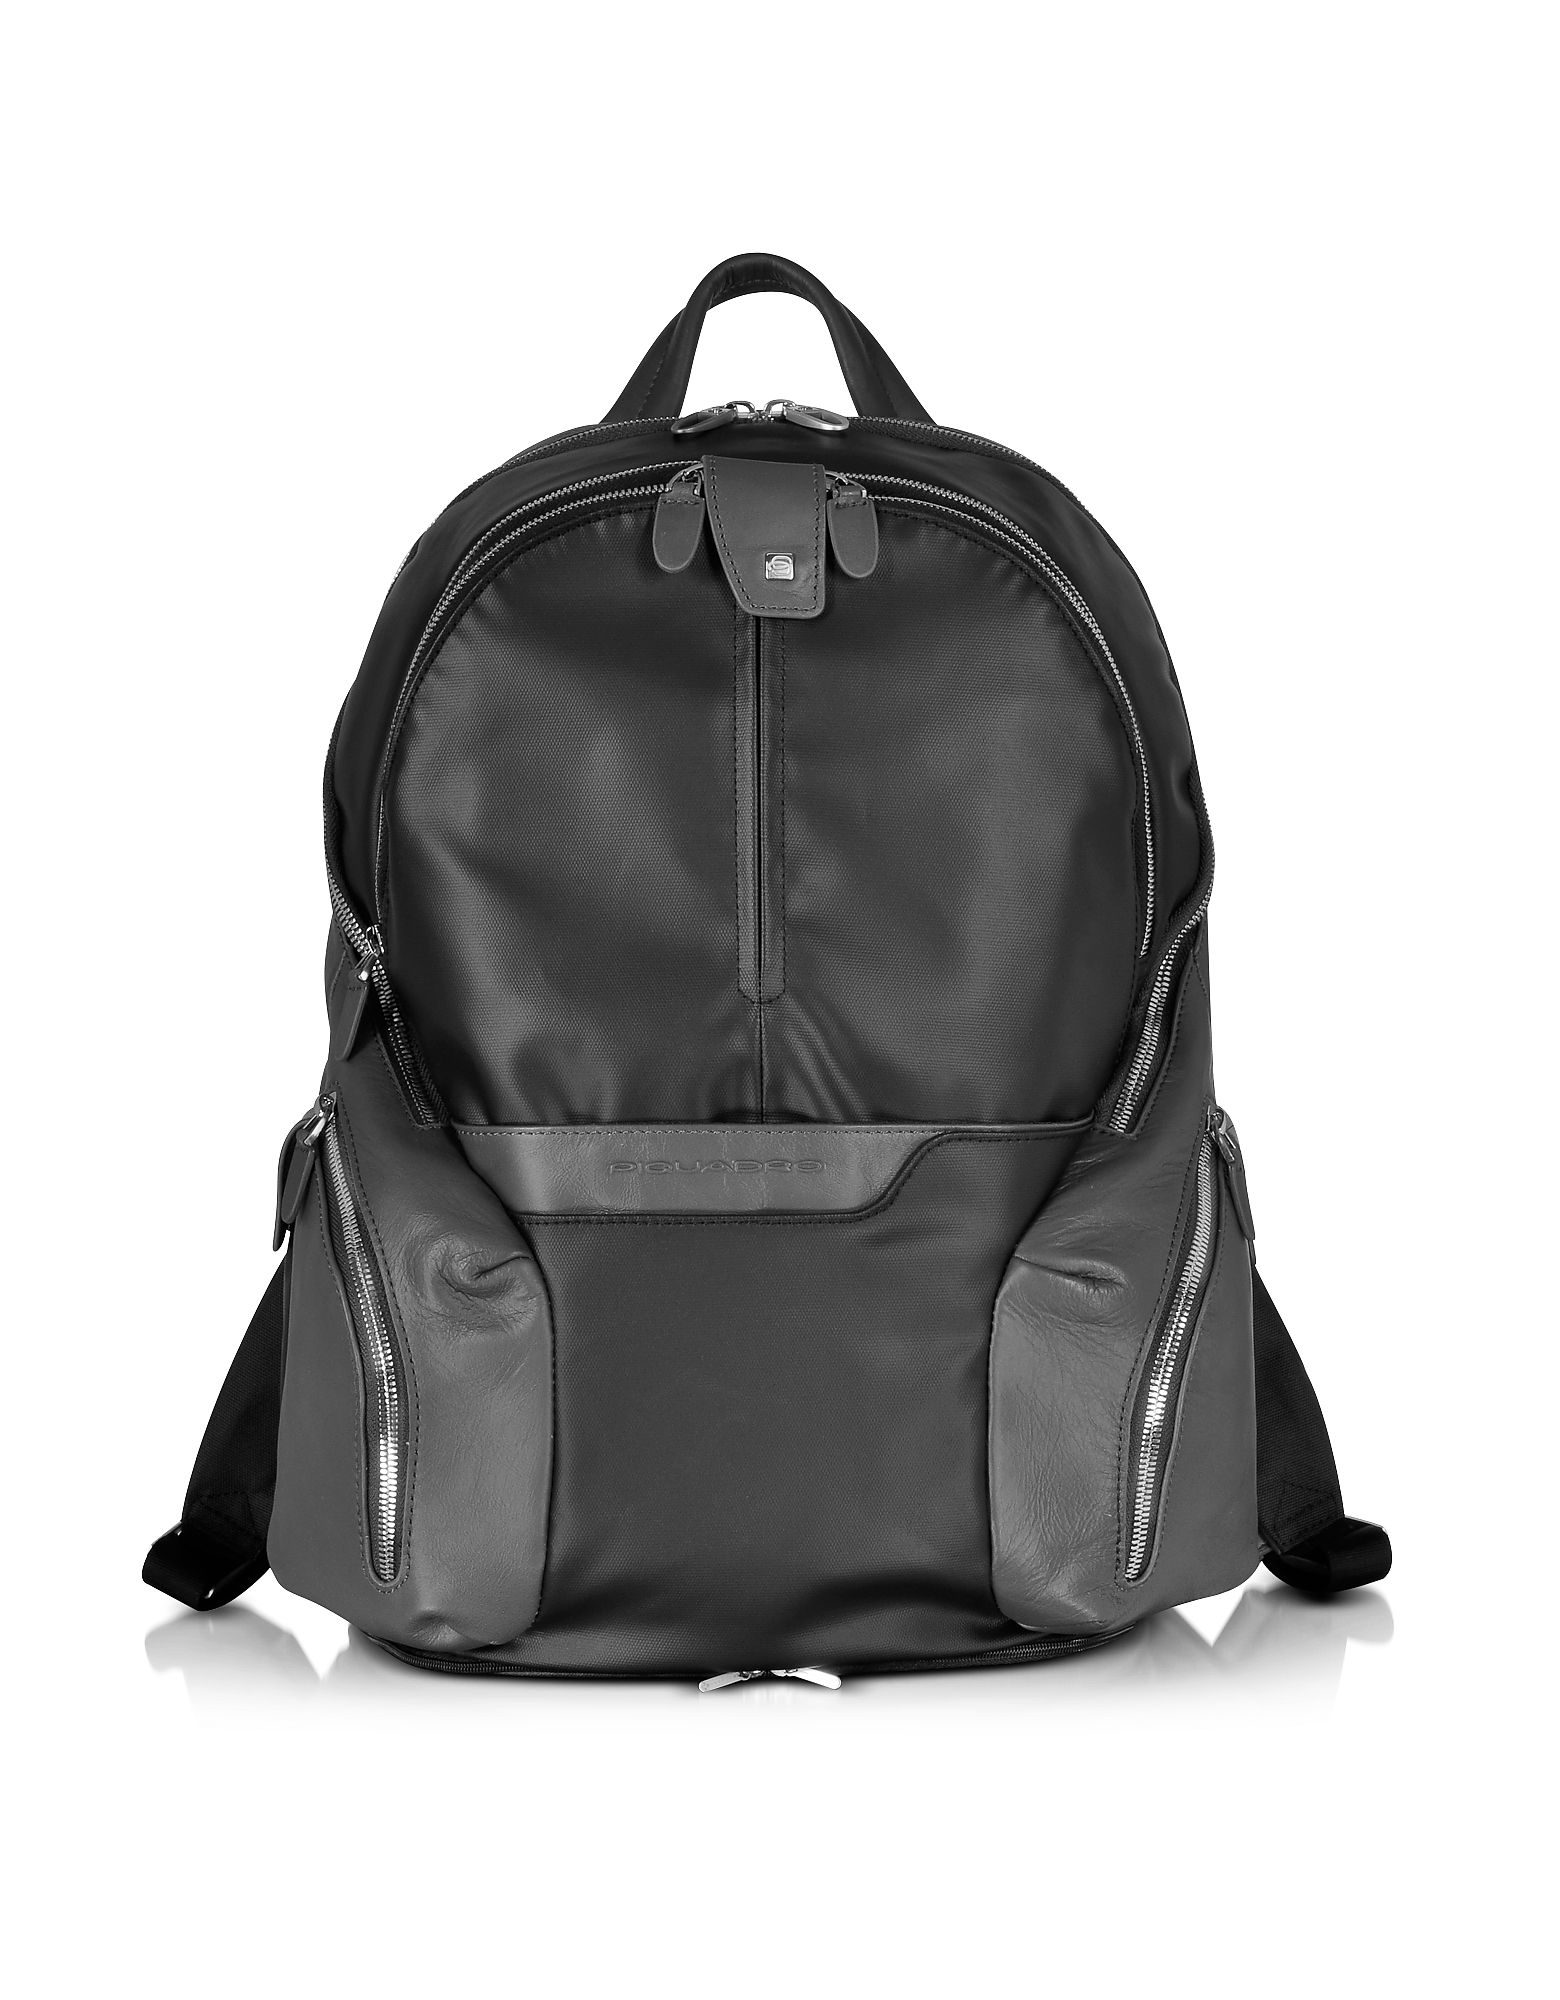 

Nylon & Leather Computer Backpack